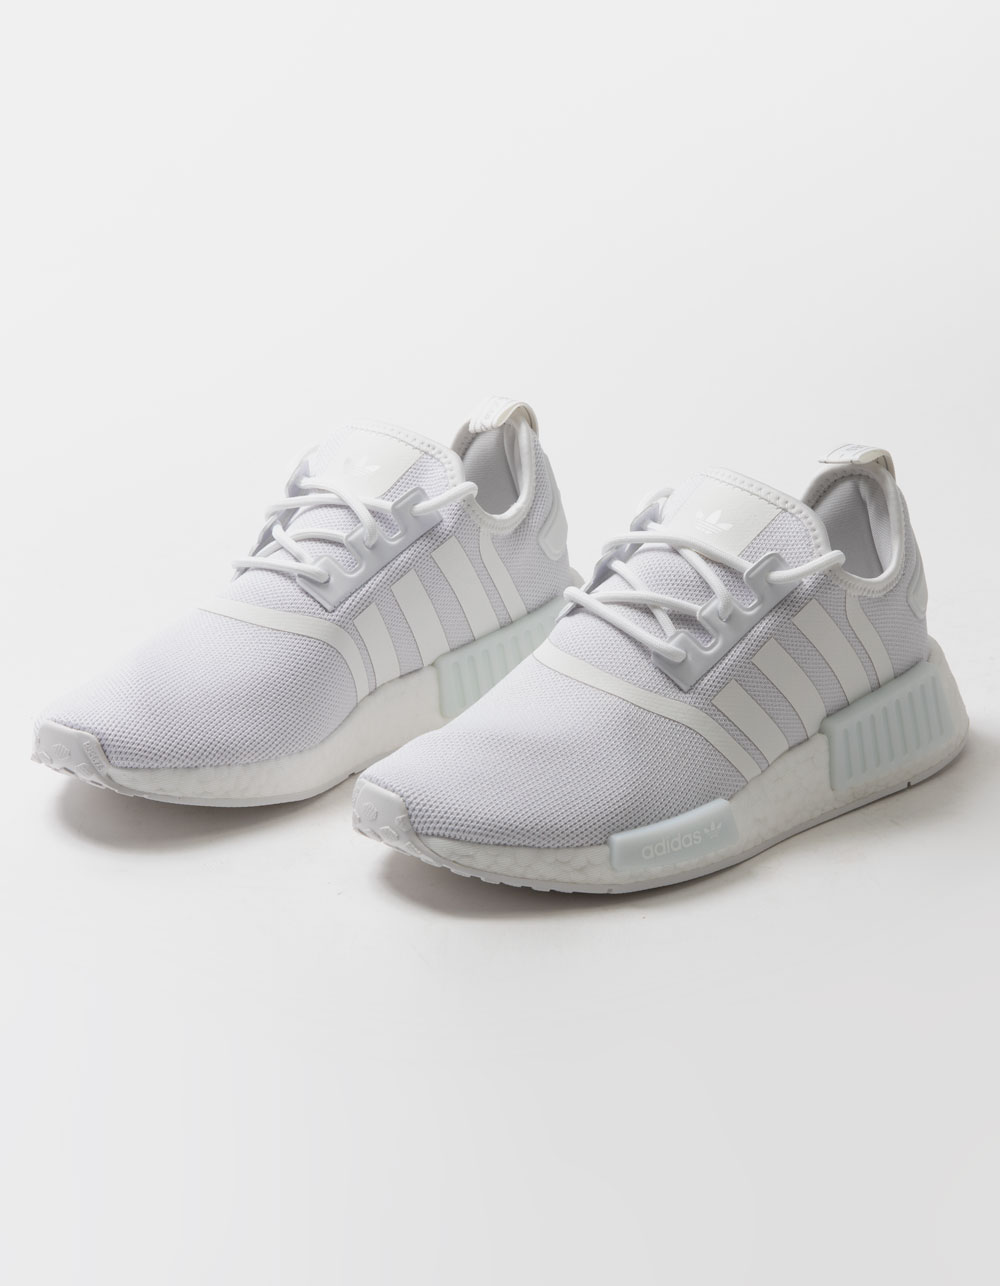 ADIDAS R1 Shoes - WHITE Tillys